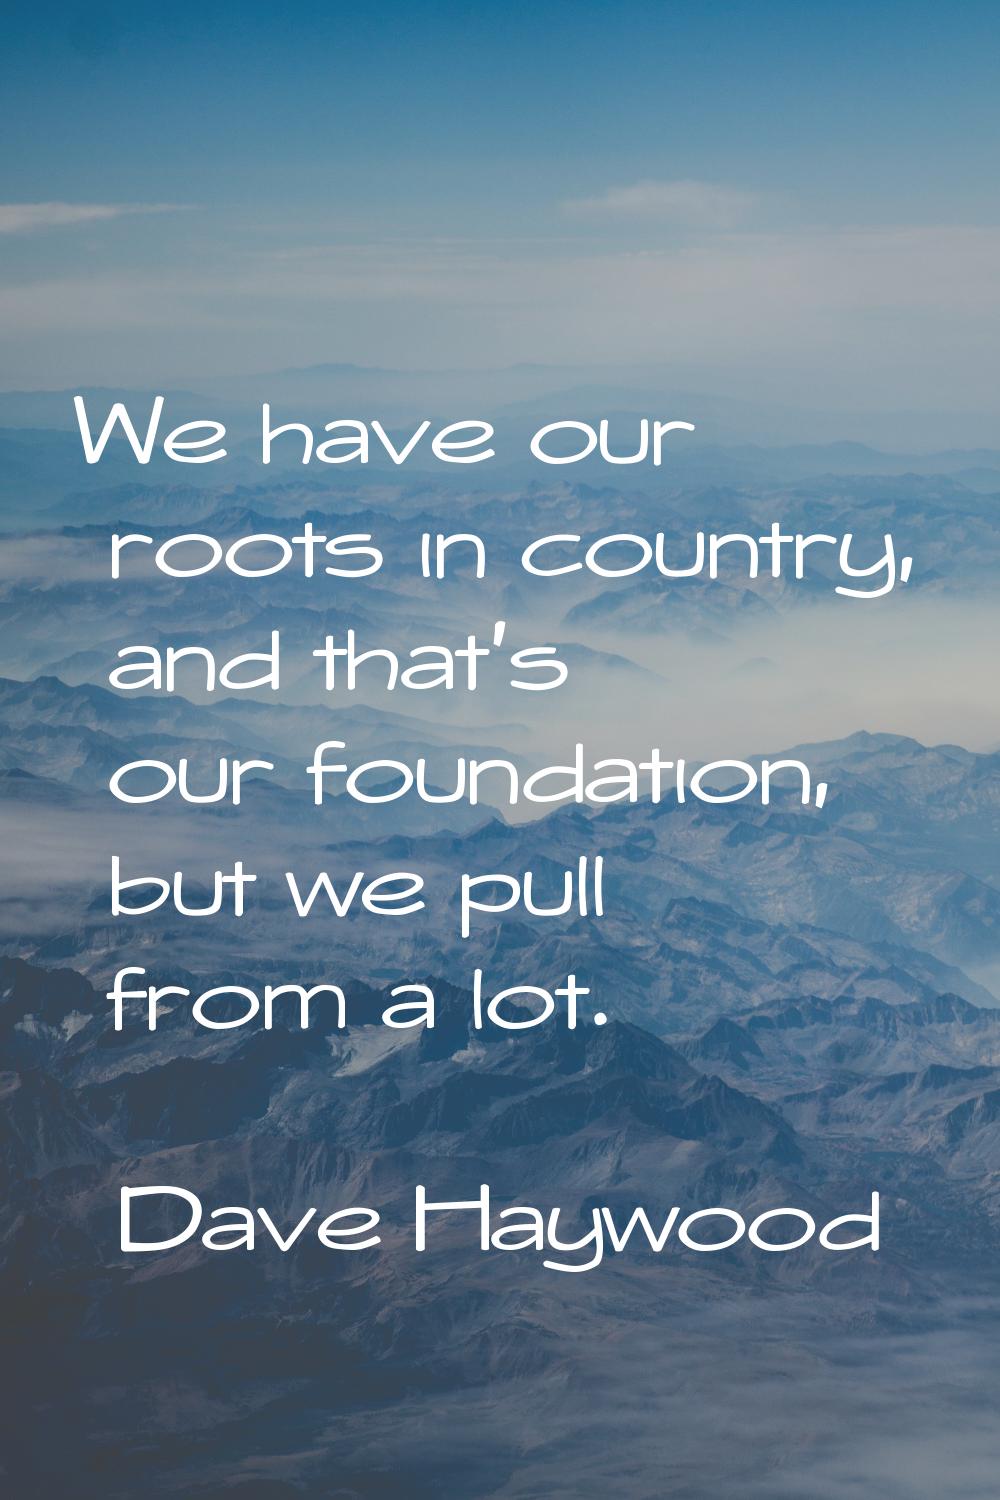 We have our roots in country, and that's our foundation, but we pull from a lot.